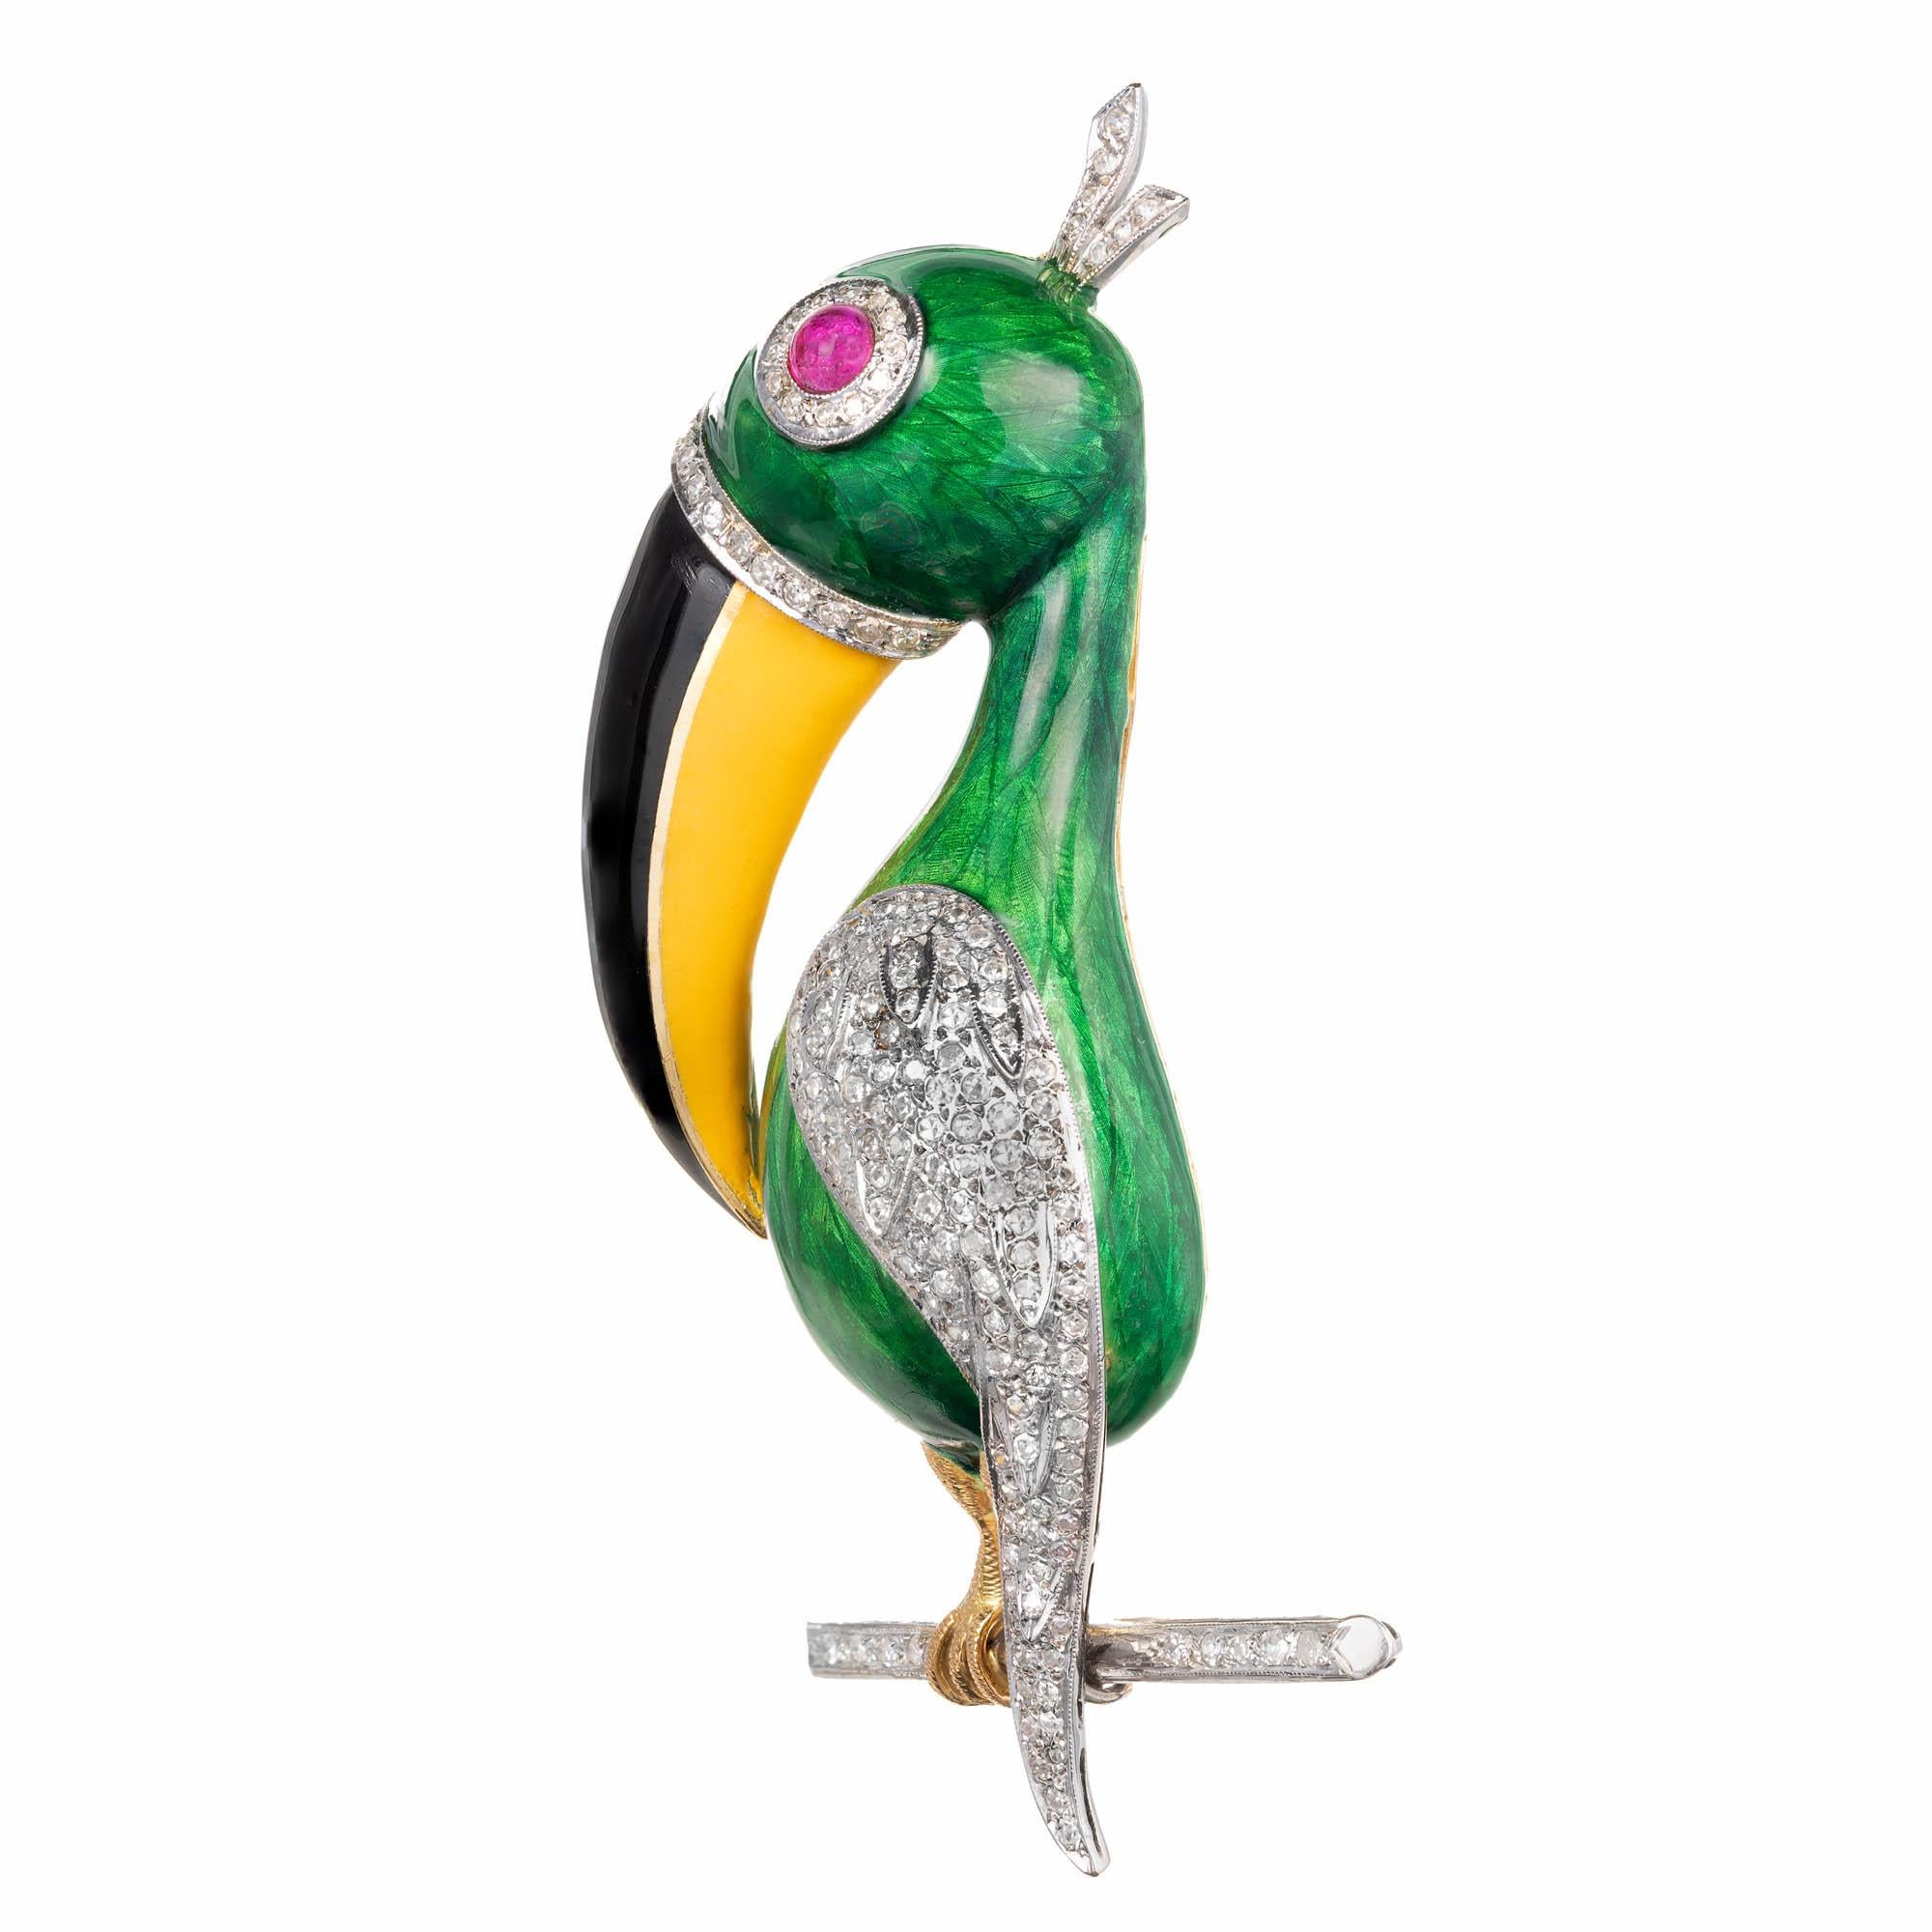 18k yellow and white gold toucan design toucan brooch.  A green enameled toucan with a black and yellow enamel beak is adorned with black with a diamond studded feather down its side, a diamond tuft of feathers at the top, Diamond circle around a